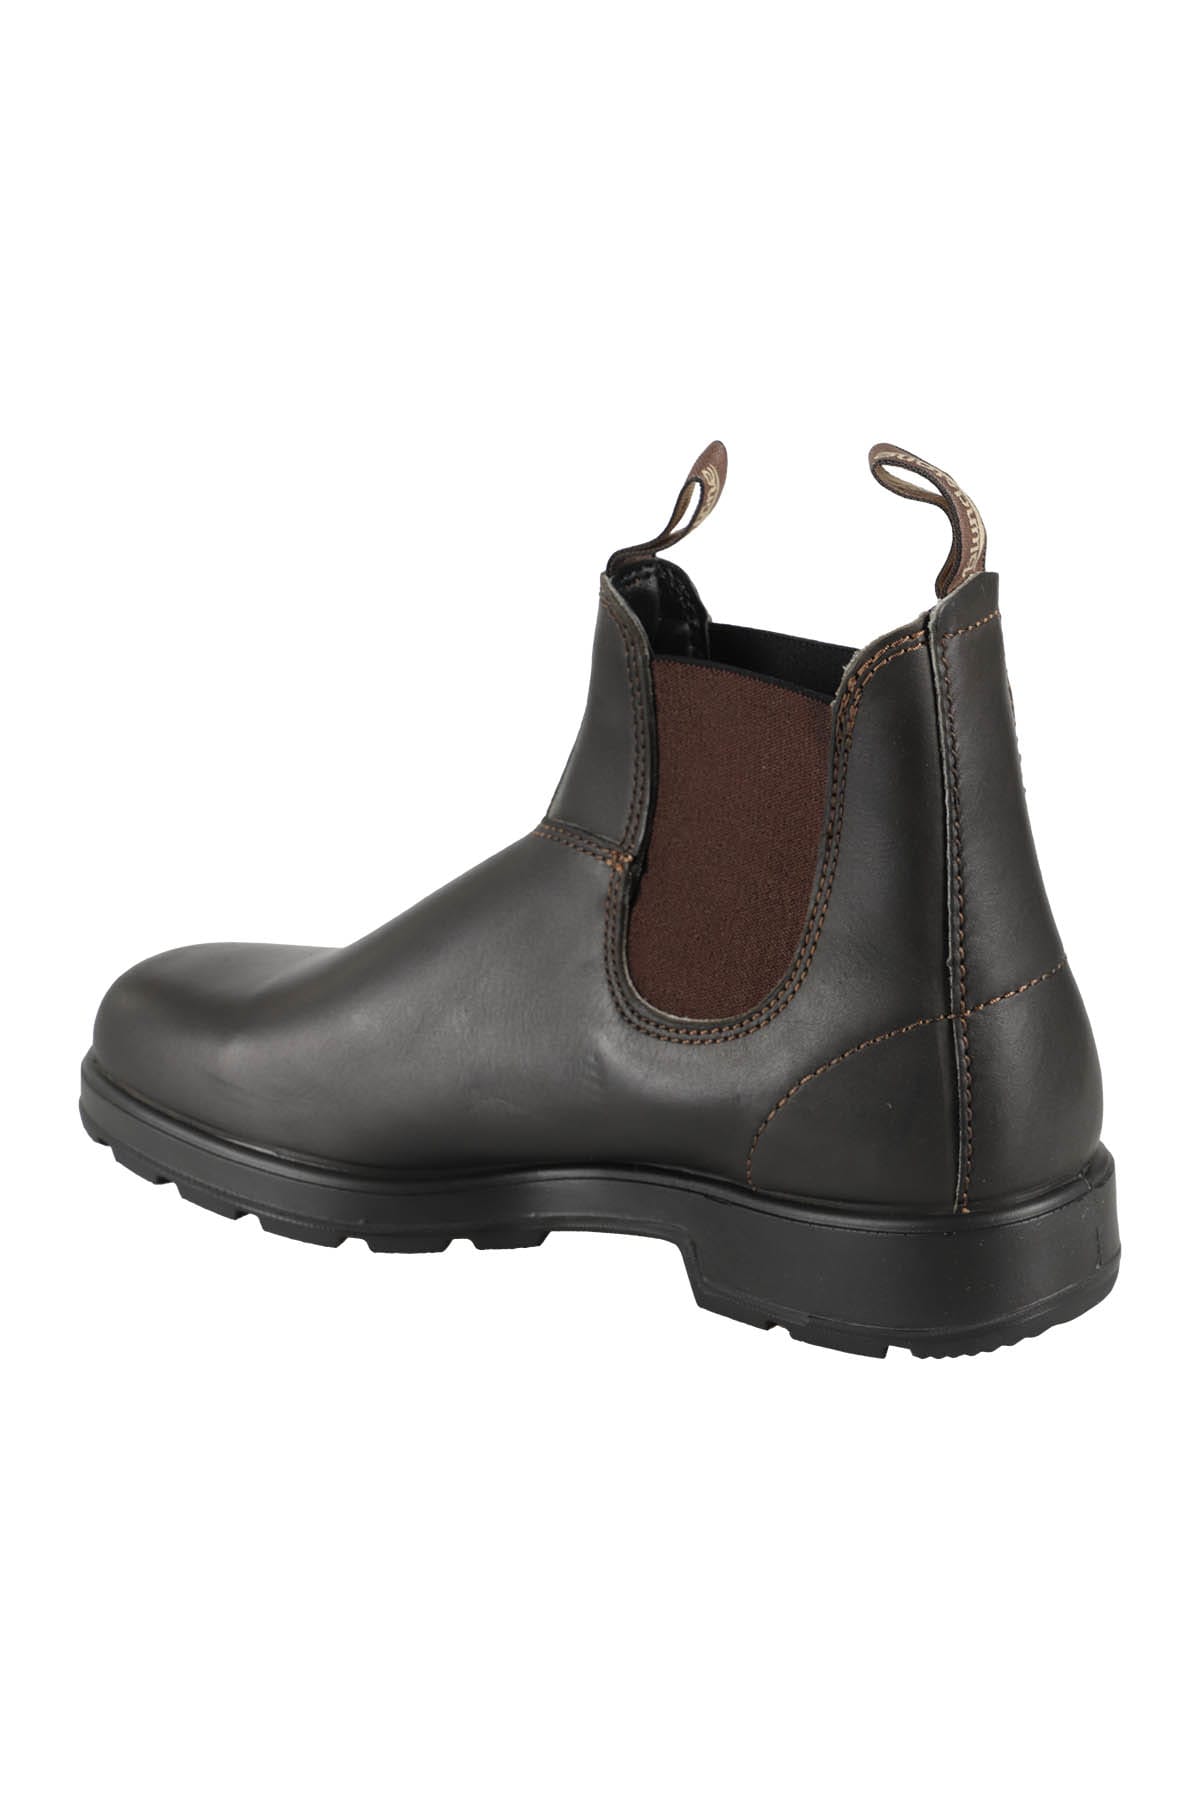 Shop Blundstone Leather In Stout Brown Brown